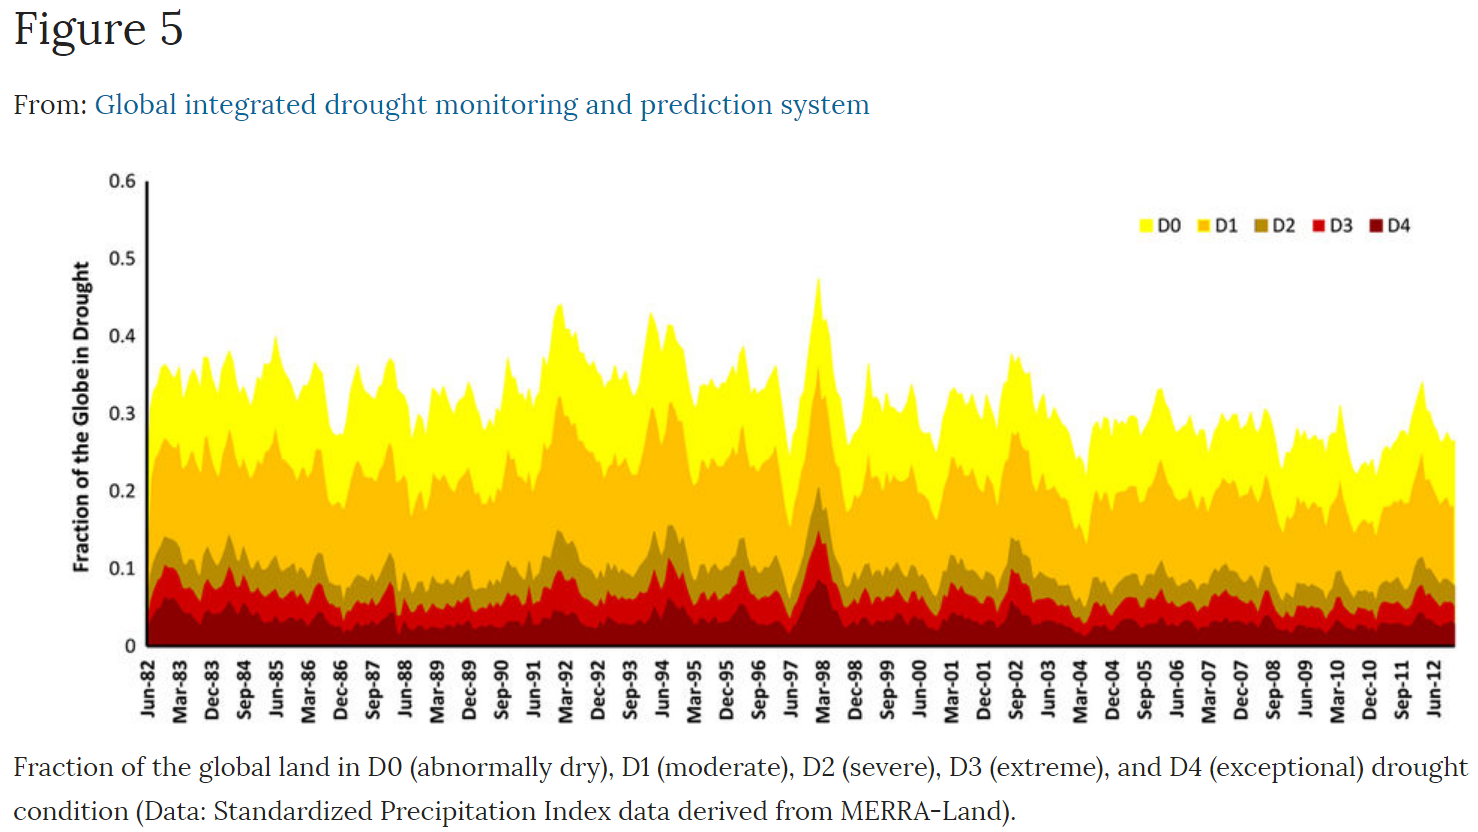 global drought trends, 1982-2012